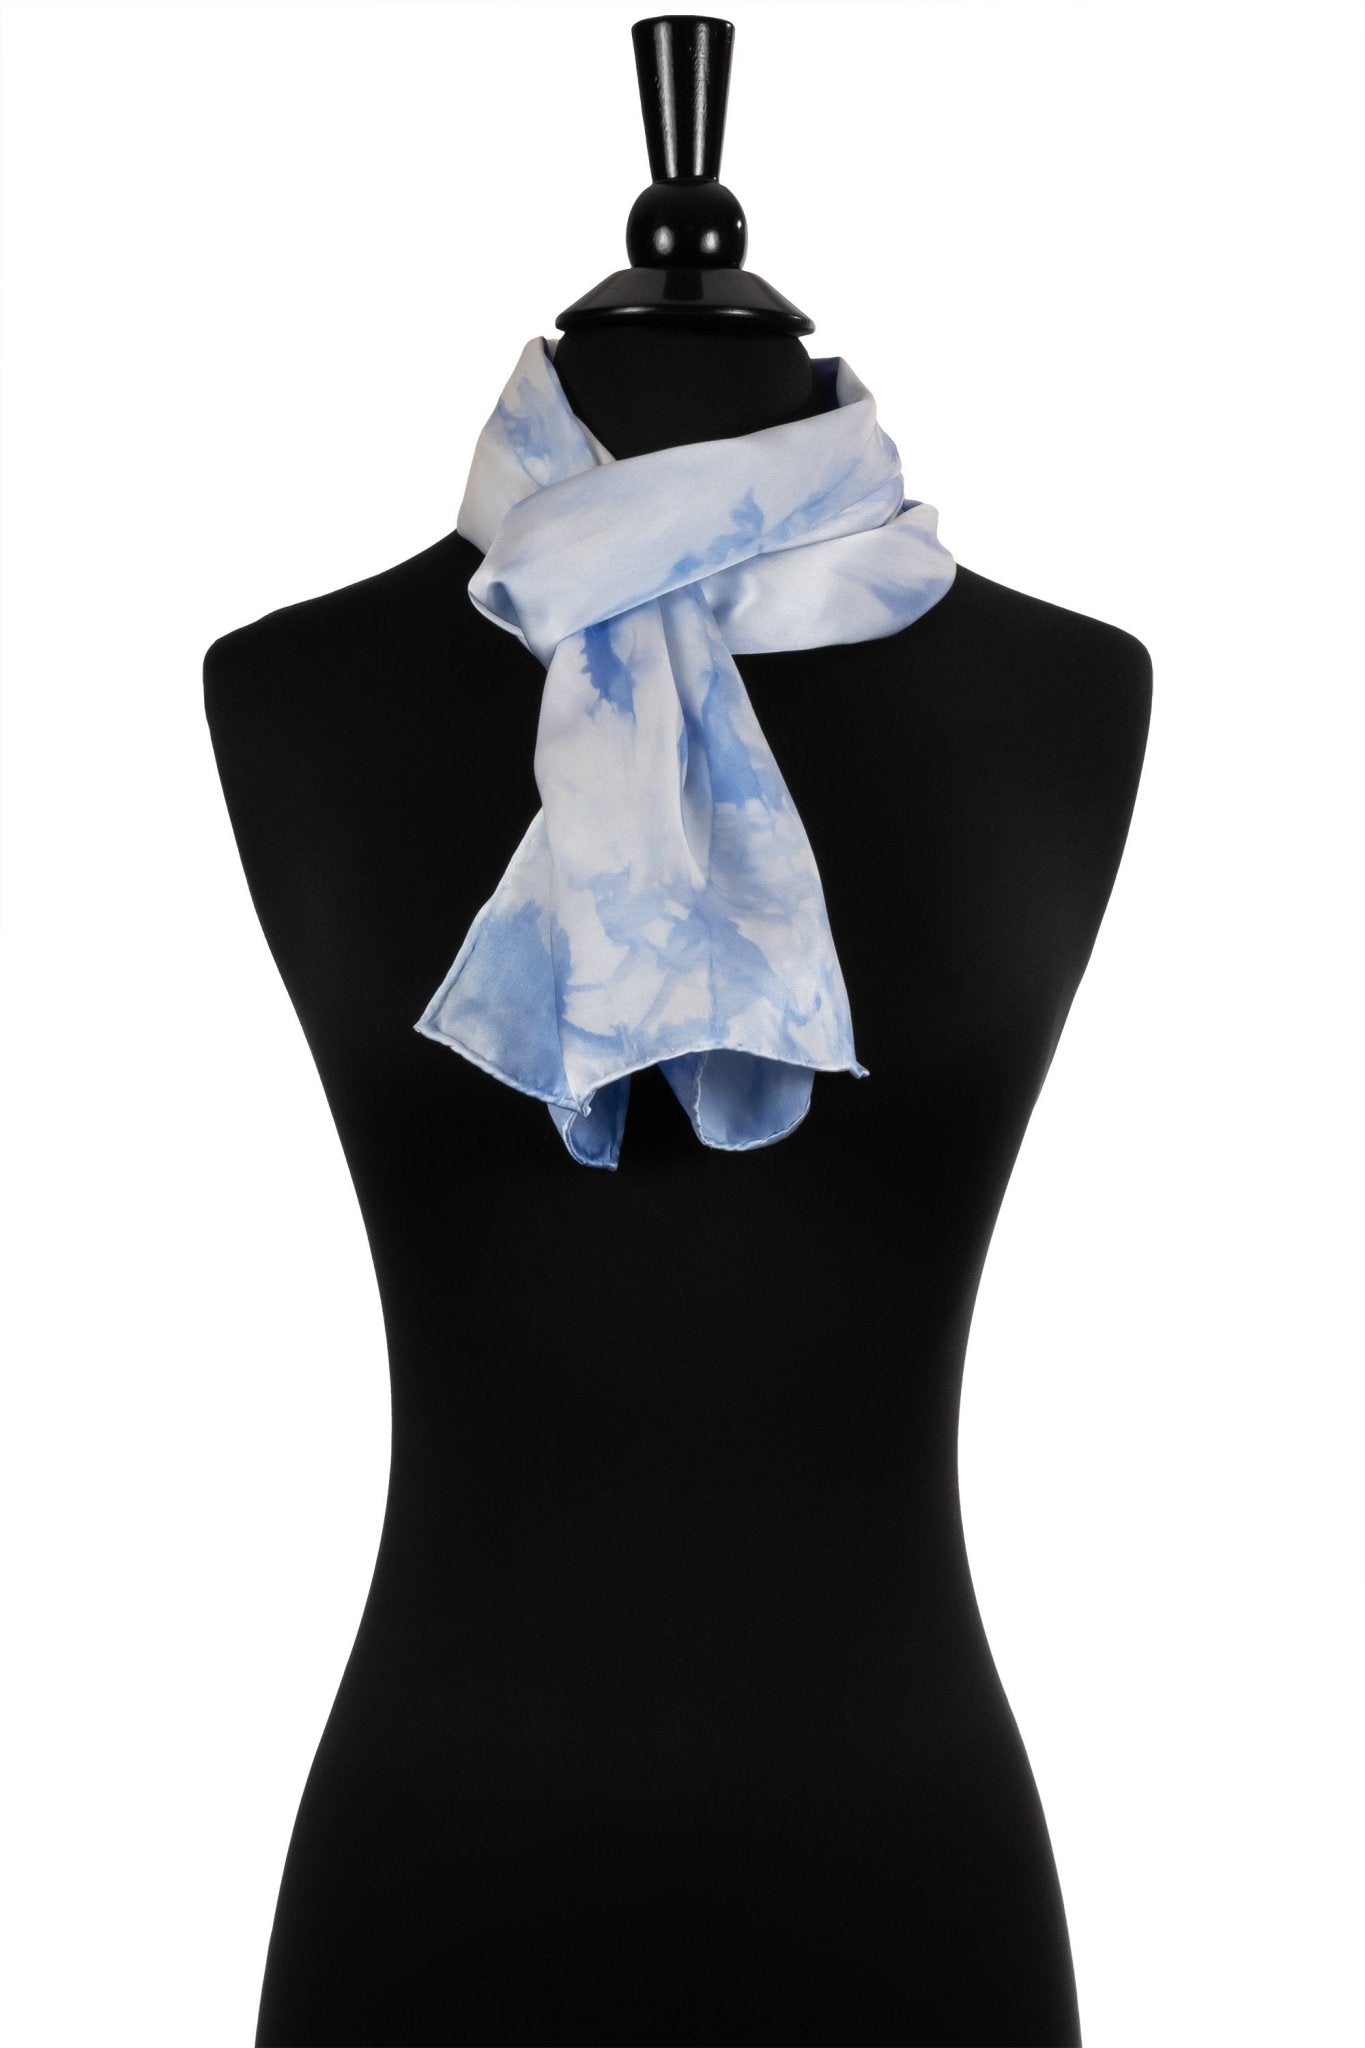 Blue and White Silk Scarf